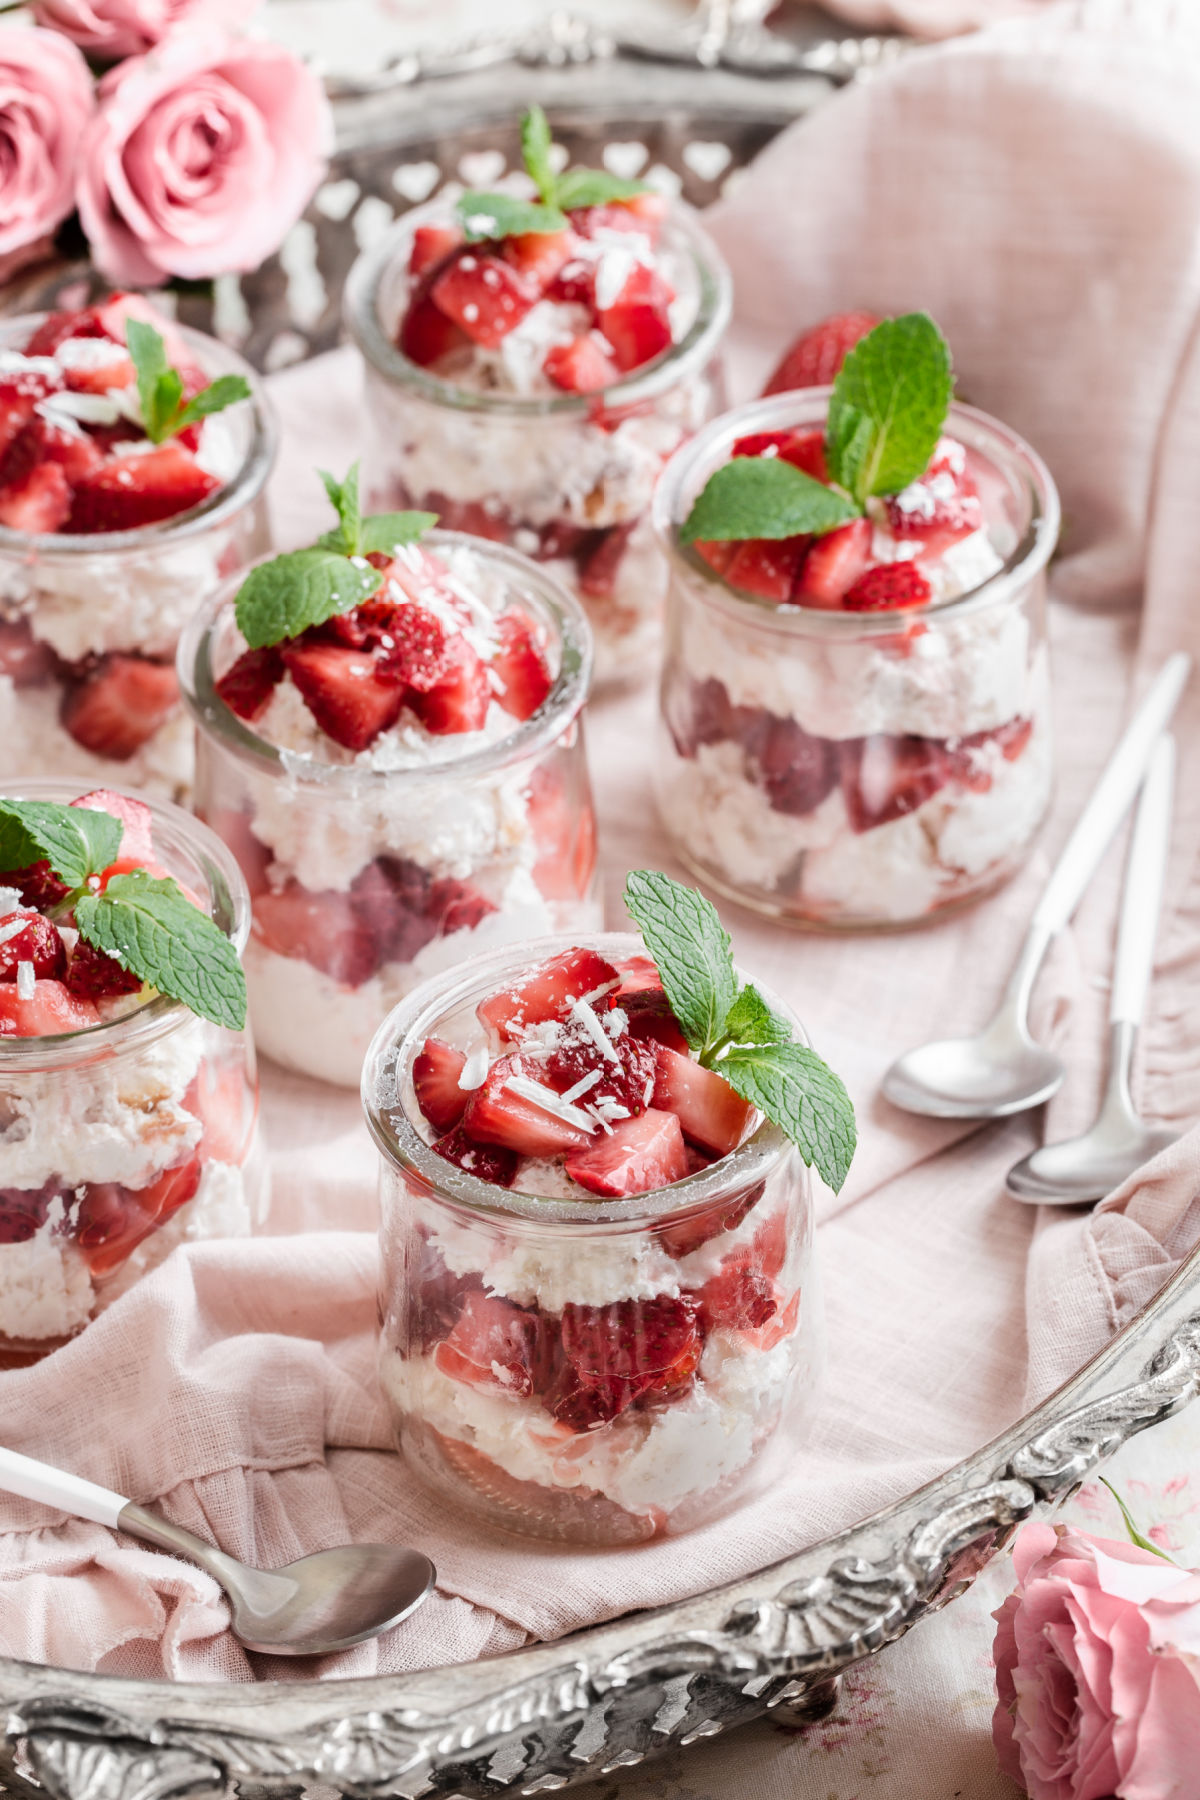 glass jars with red and white layered dessert sitting on pink napkin on tray.